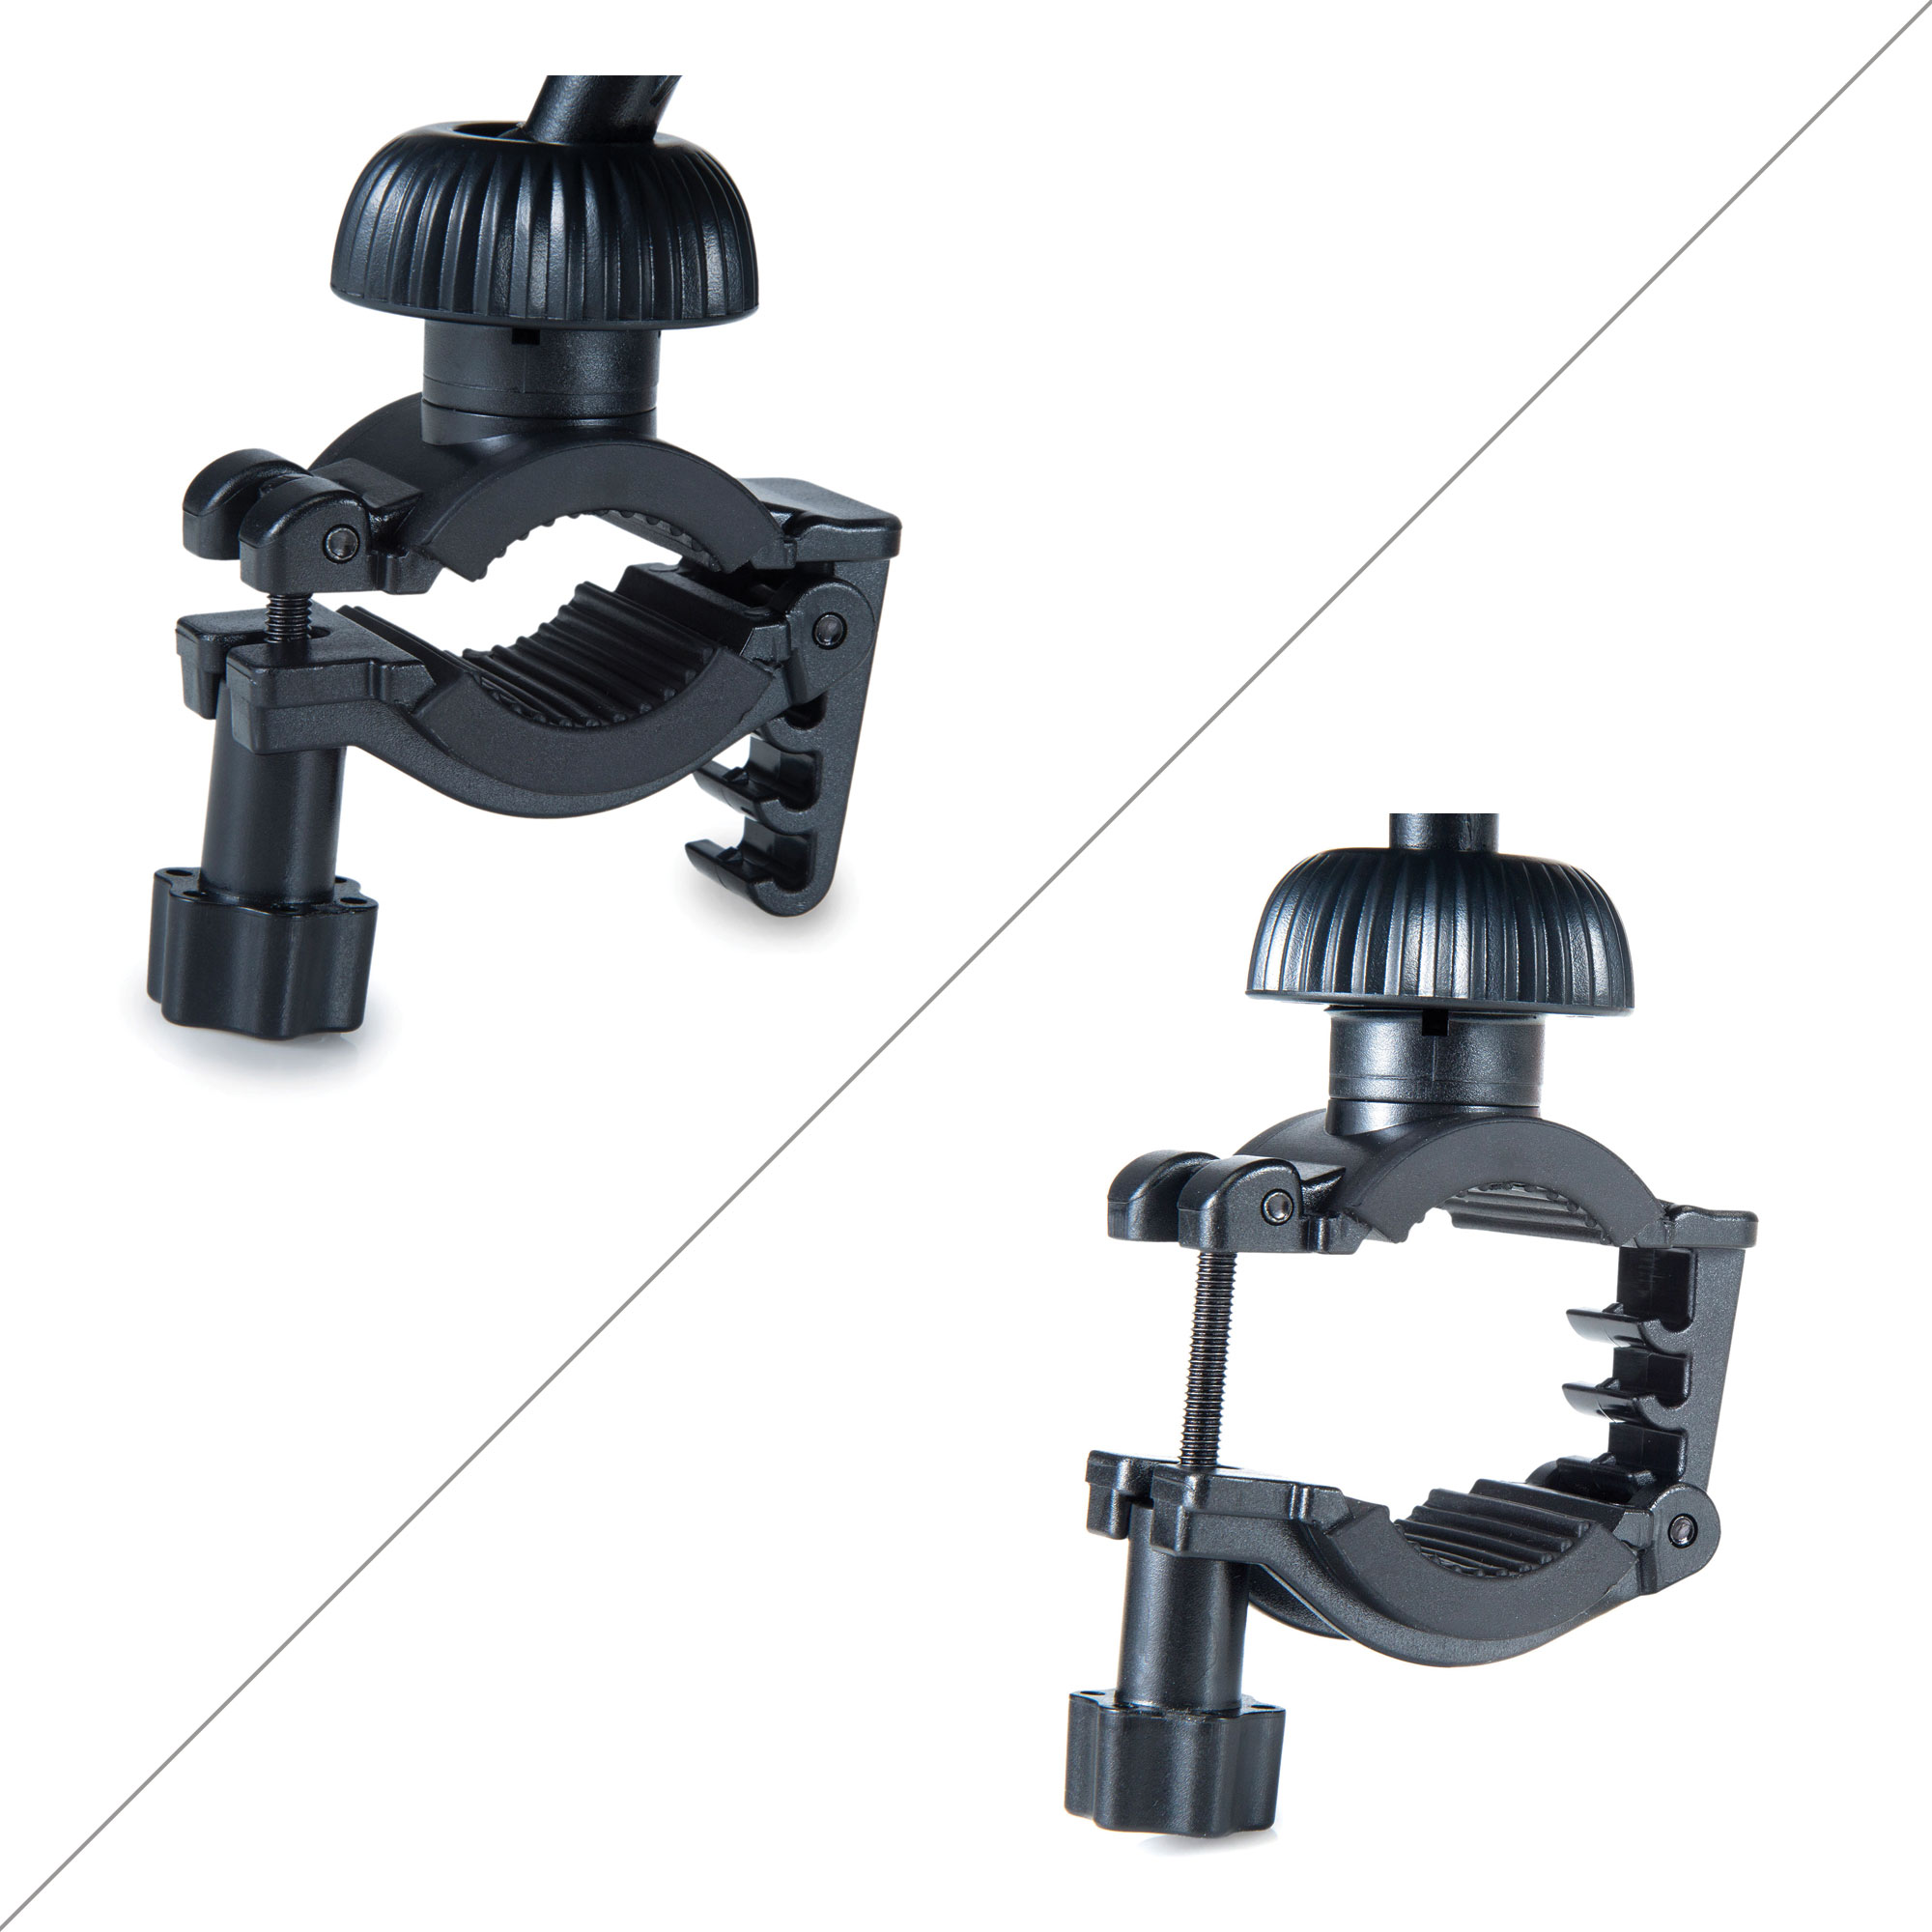 Heavy Duty Weather Resistant Bicycle / Motorcycle Handlebar Mount Holder Designed for the LG Tegra 2